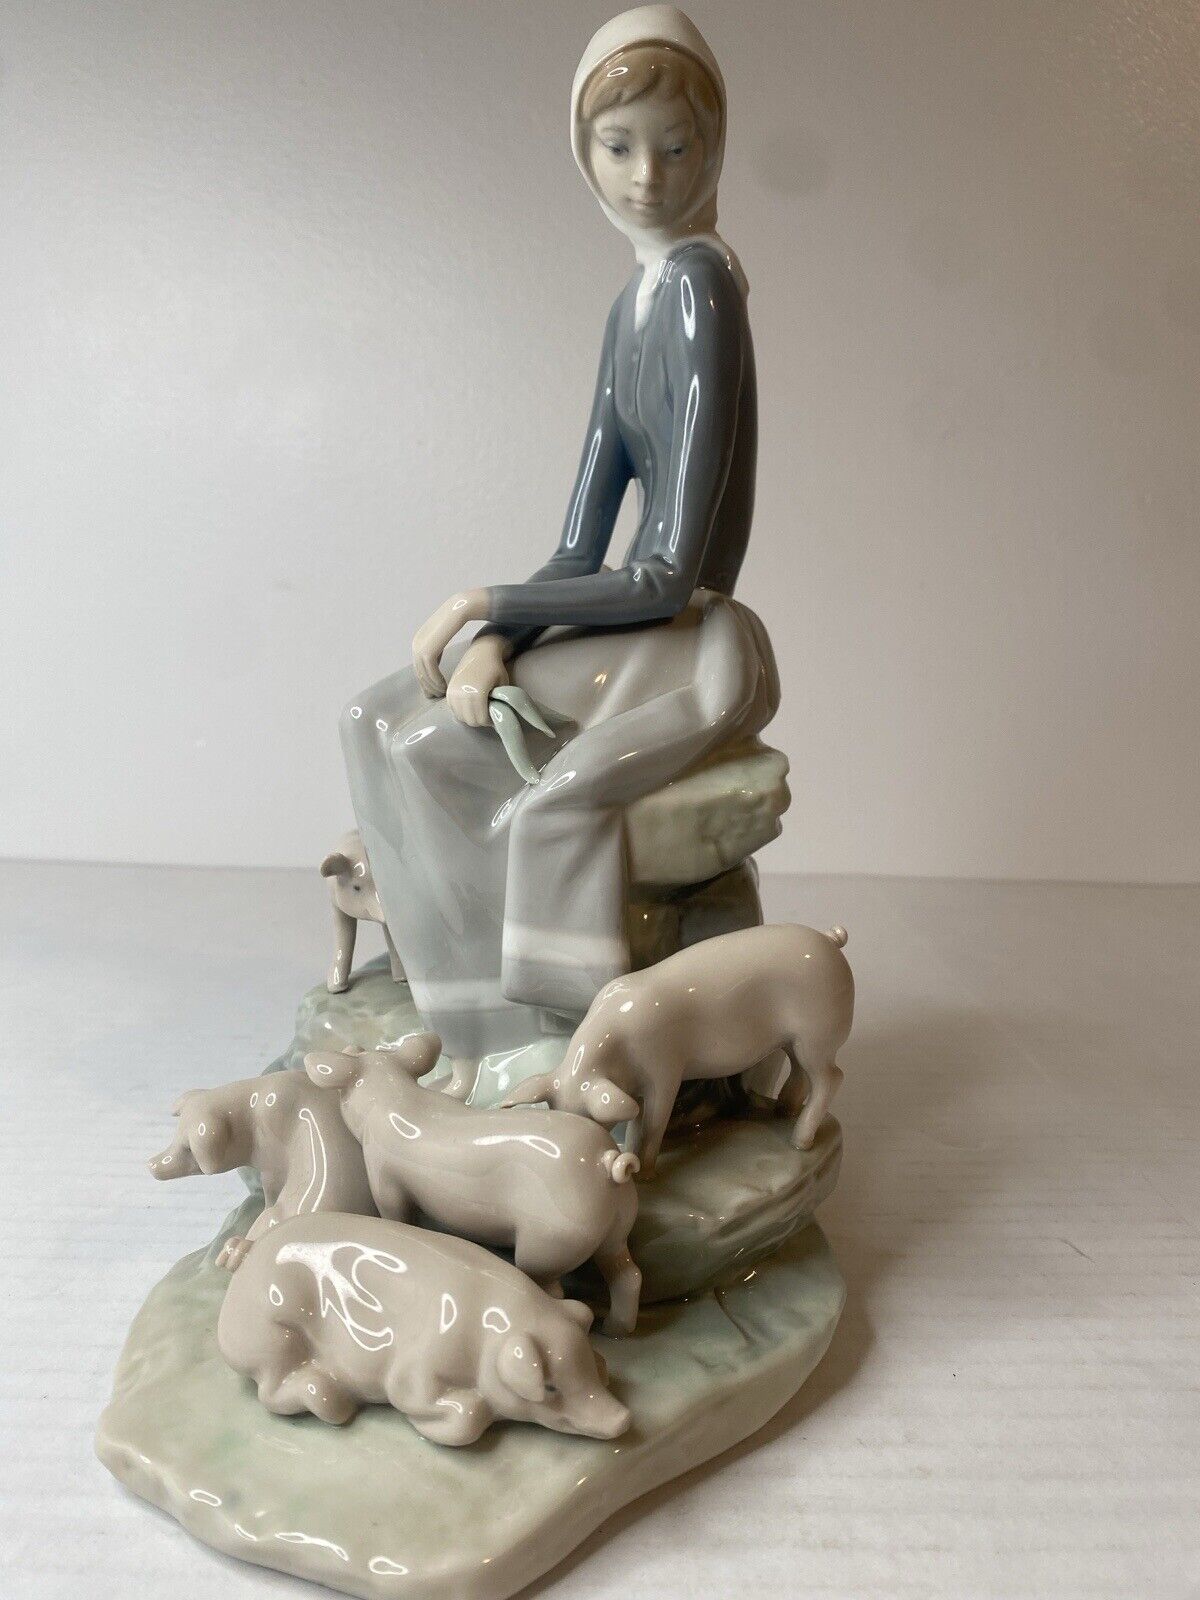 Vintage Retired Lladro Porcelain Figurine Girl with Piglets #4572 N/M Condition